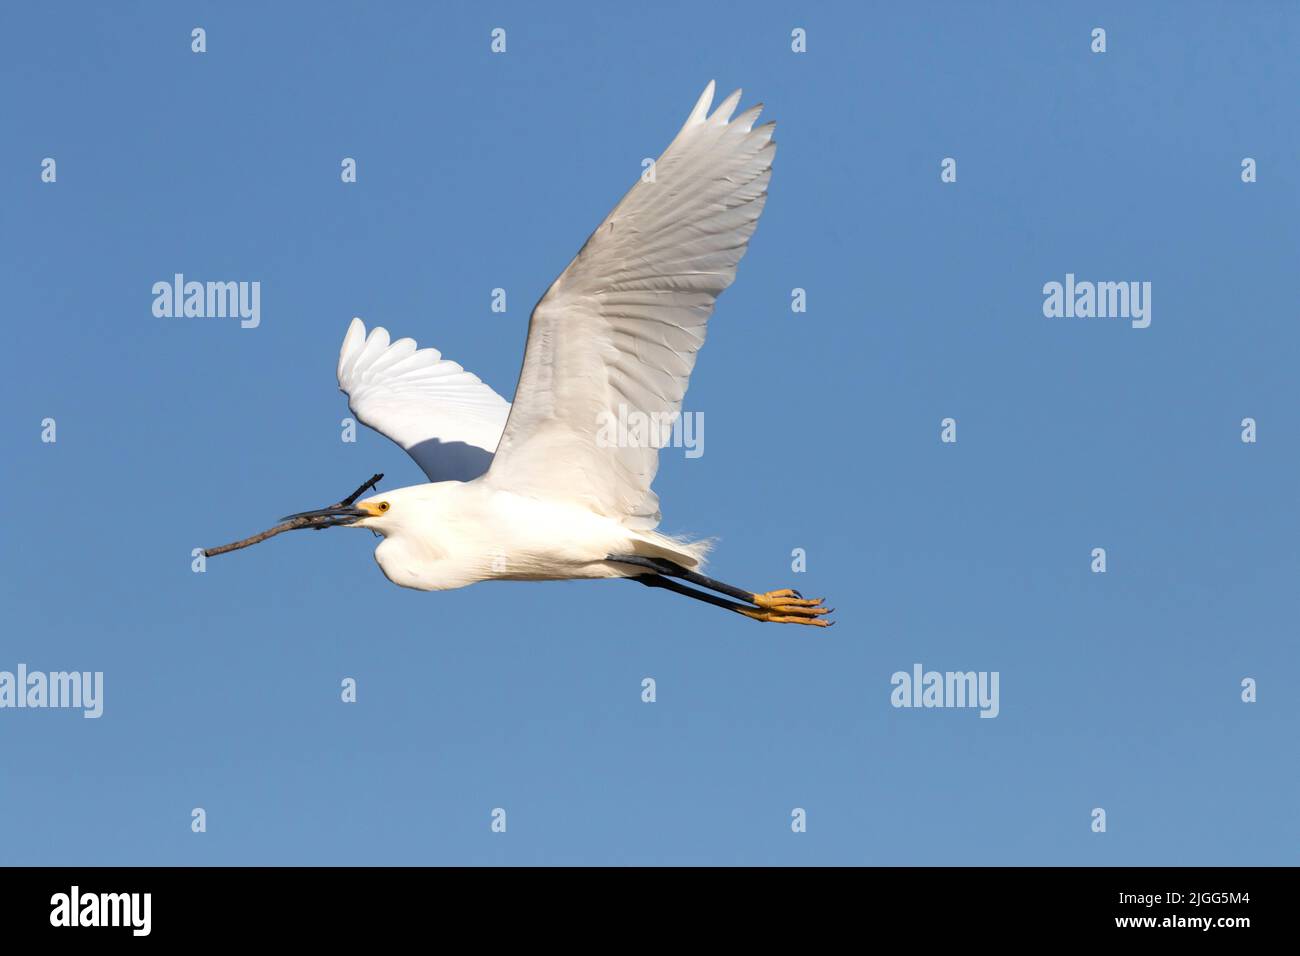 A Snowy Egret, Egretta thula, carries nesting material back to a colonial nesting location in the San Joaquin Valley, CA. Stock Photo